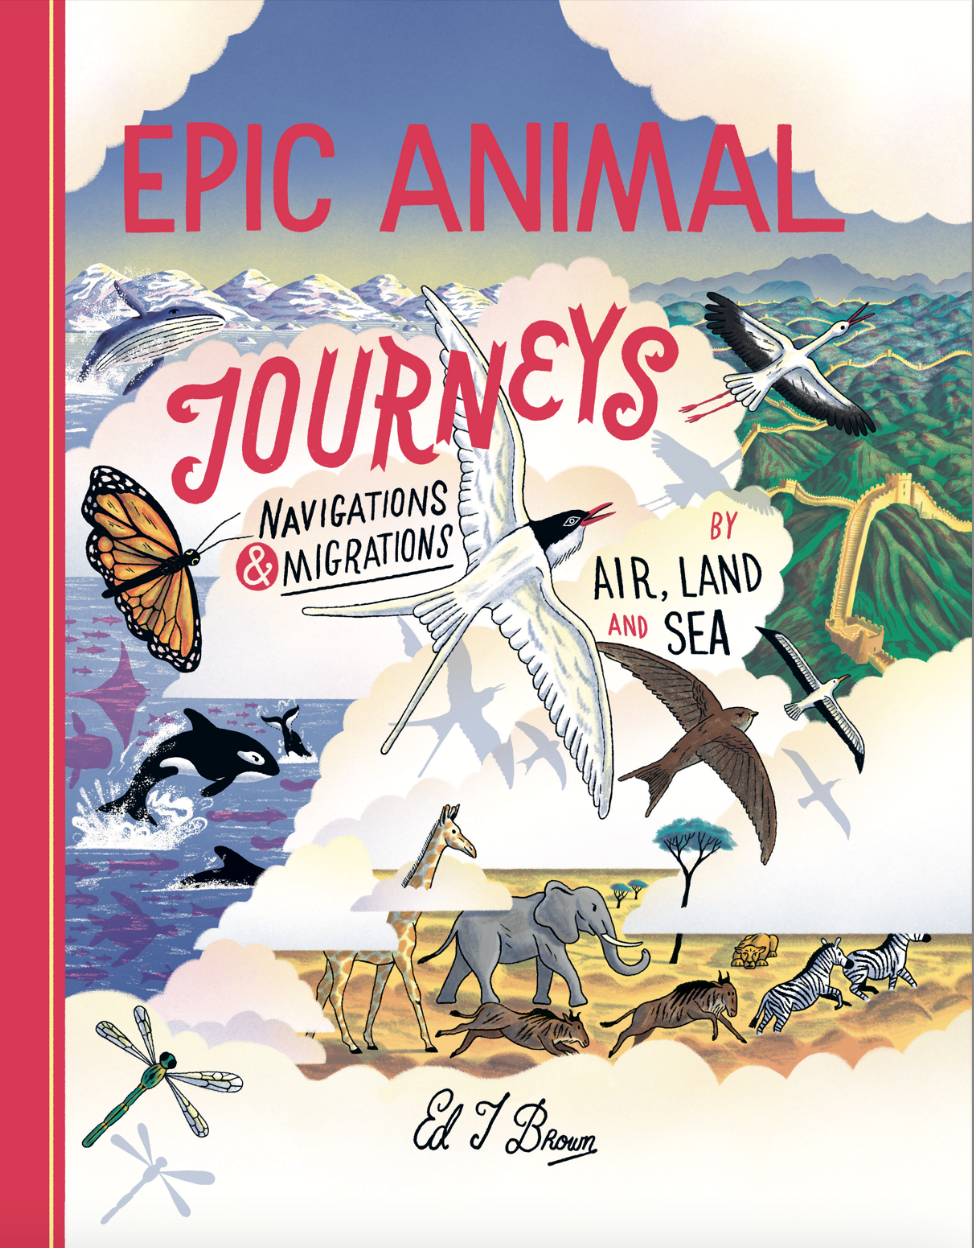 Epic Animal Journeys: Migration and navigation by air, land and sea —  Cicada Books